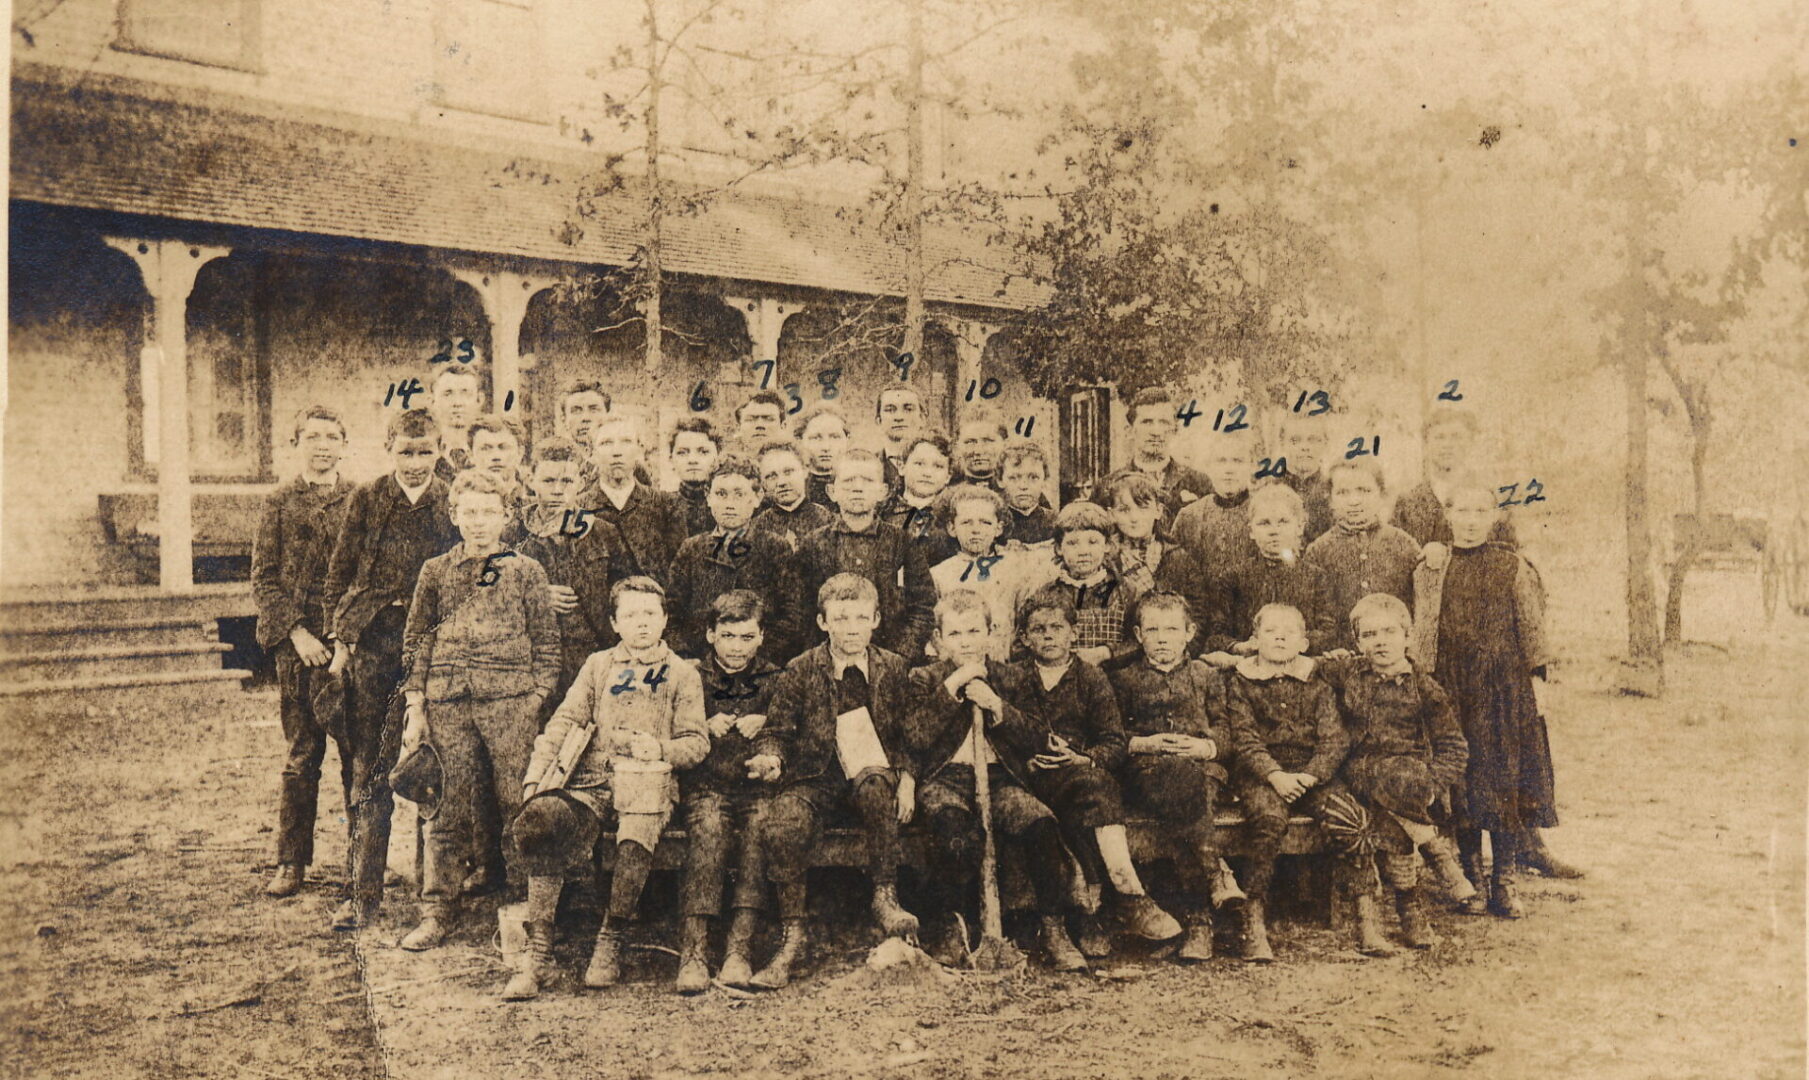 School Humphries Children attended, circa 1889.  Numbers written on this photo, probably by Dora Humphries.
1.. Joseph W. Humphries, 2. John D. Humphries, 3. Dora Humphries, 4 J. R. Hardwick, 5 Ned Todd, 6. Mattie Lowe, 7. Arthur Terrell, 8. Lizzie Todd, 9. Pat Patterson, 10. Minnie Harrison, 11. Lillie Lindley, 12. Maggie Lane, 13. Fannie Belle Campbell, 14. Paul Griffin, 15. Ed Griffin, 16. John Lowe, 17. Sallie Lowe, 18. Bertha Todd, 19. Annie Lowe, 20. Eva Sims, 21. Otelia Patterson, 22. Kate Hope, 23. Gus Jones, 24. Morton Butler, 25. Cesie Terrell.  Also: Fedna Holland, Maggie Lowe, and Will Harrison.